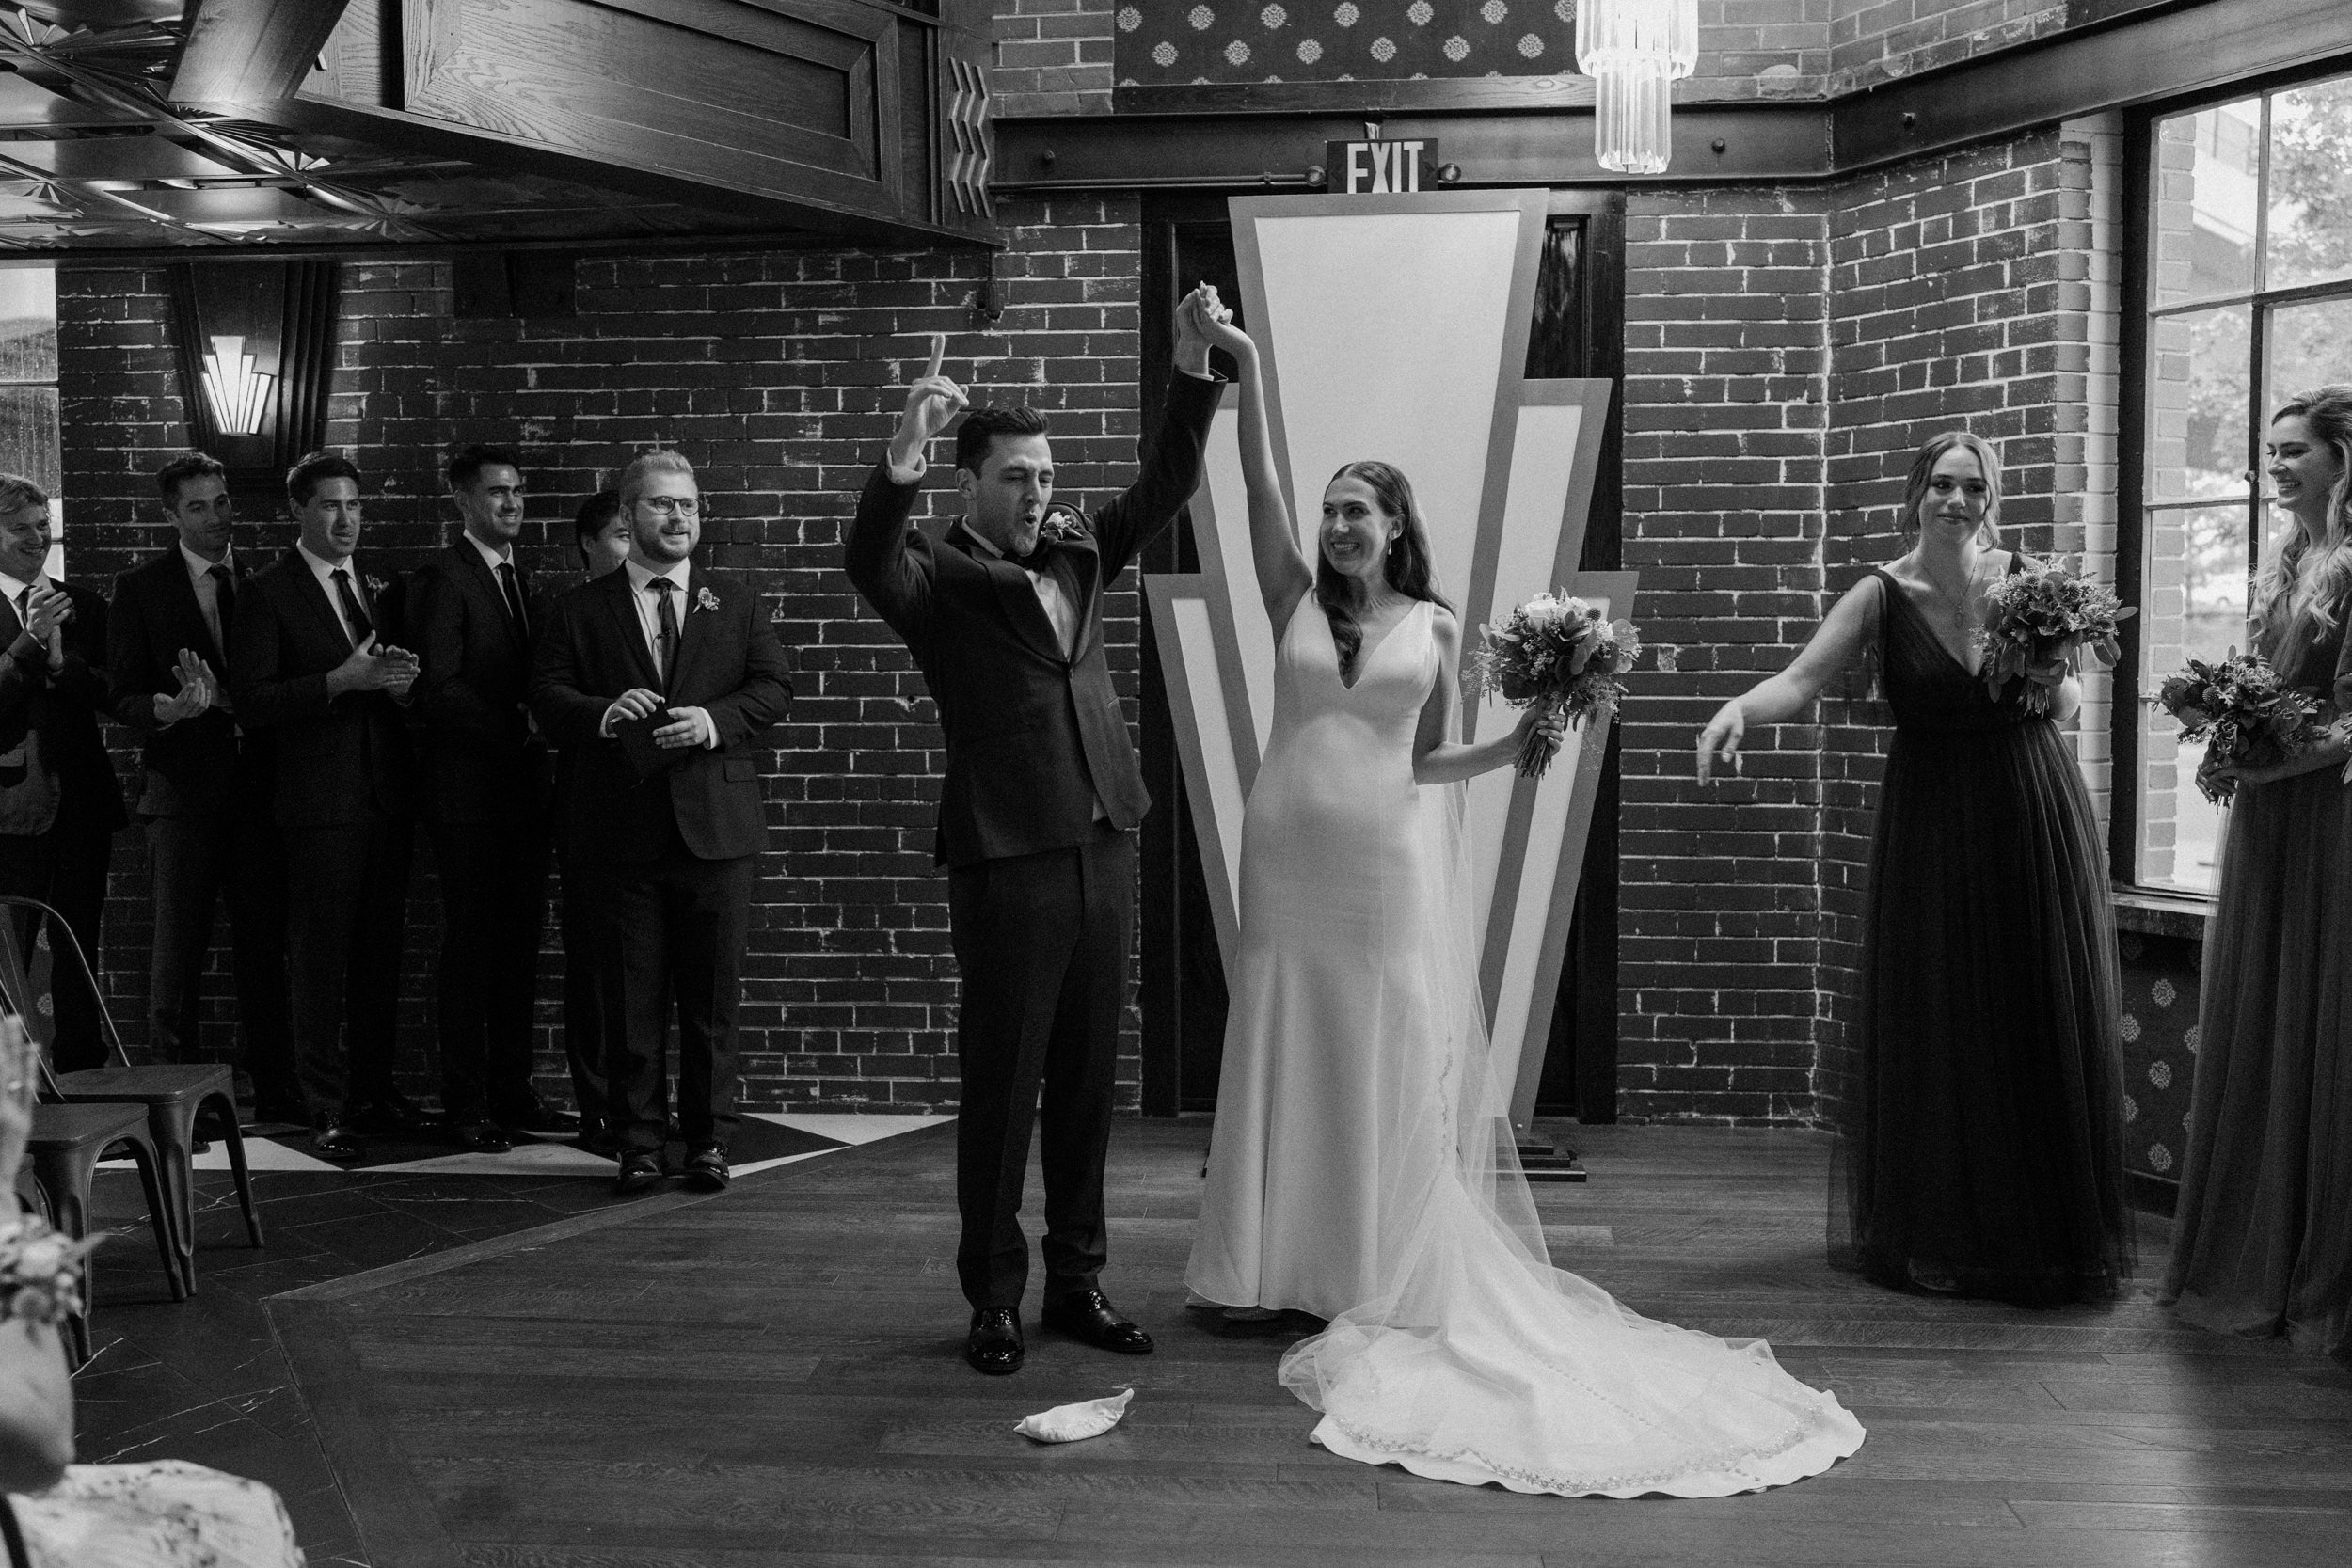 The bride and groom raise their hands in celebration at the altar